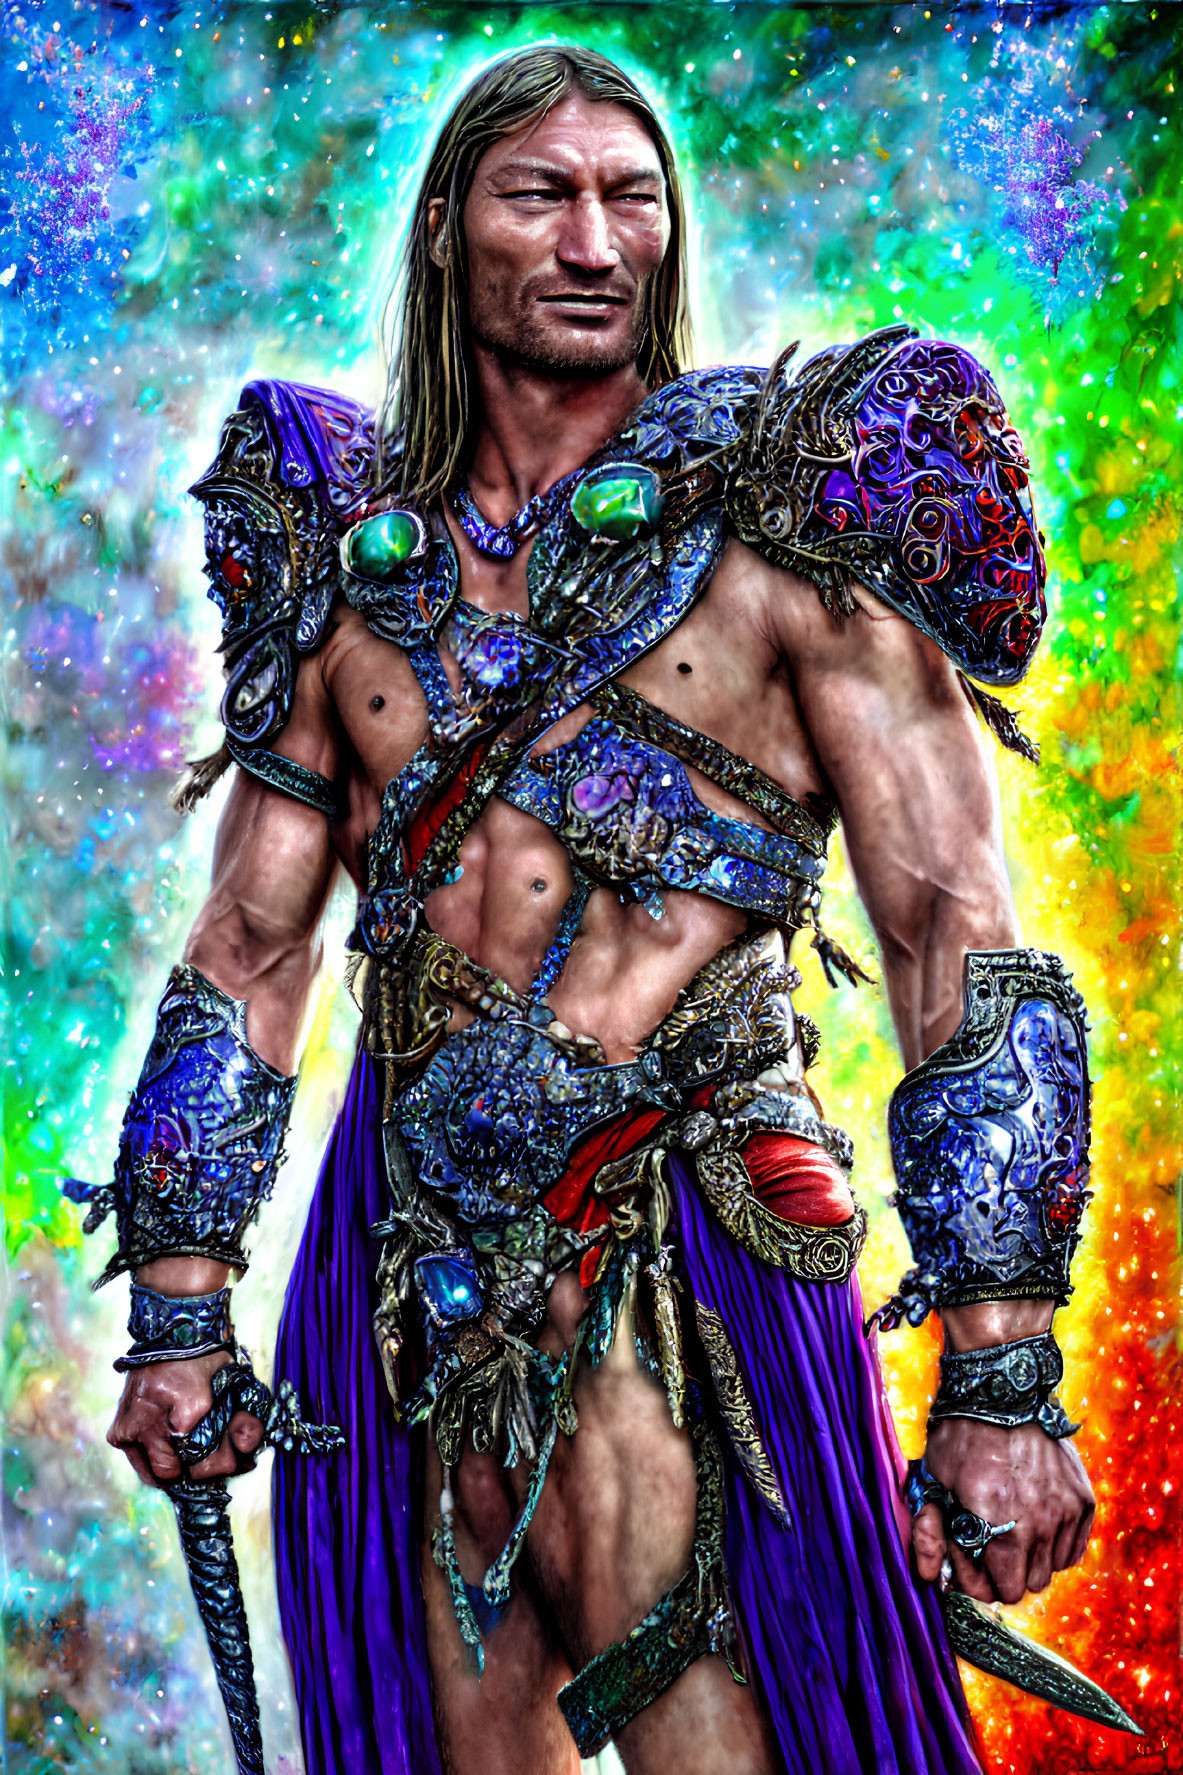 Muscular figure in fantasy armor with gemstones against cosmic backdrop